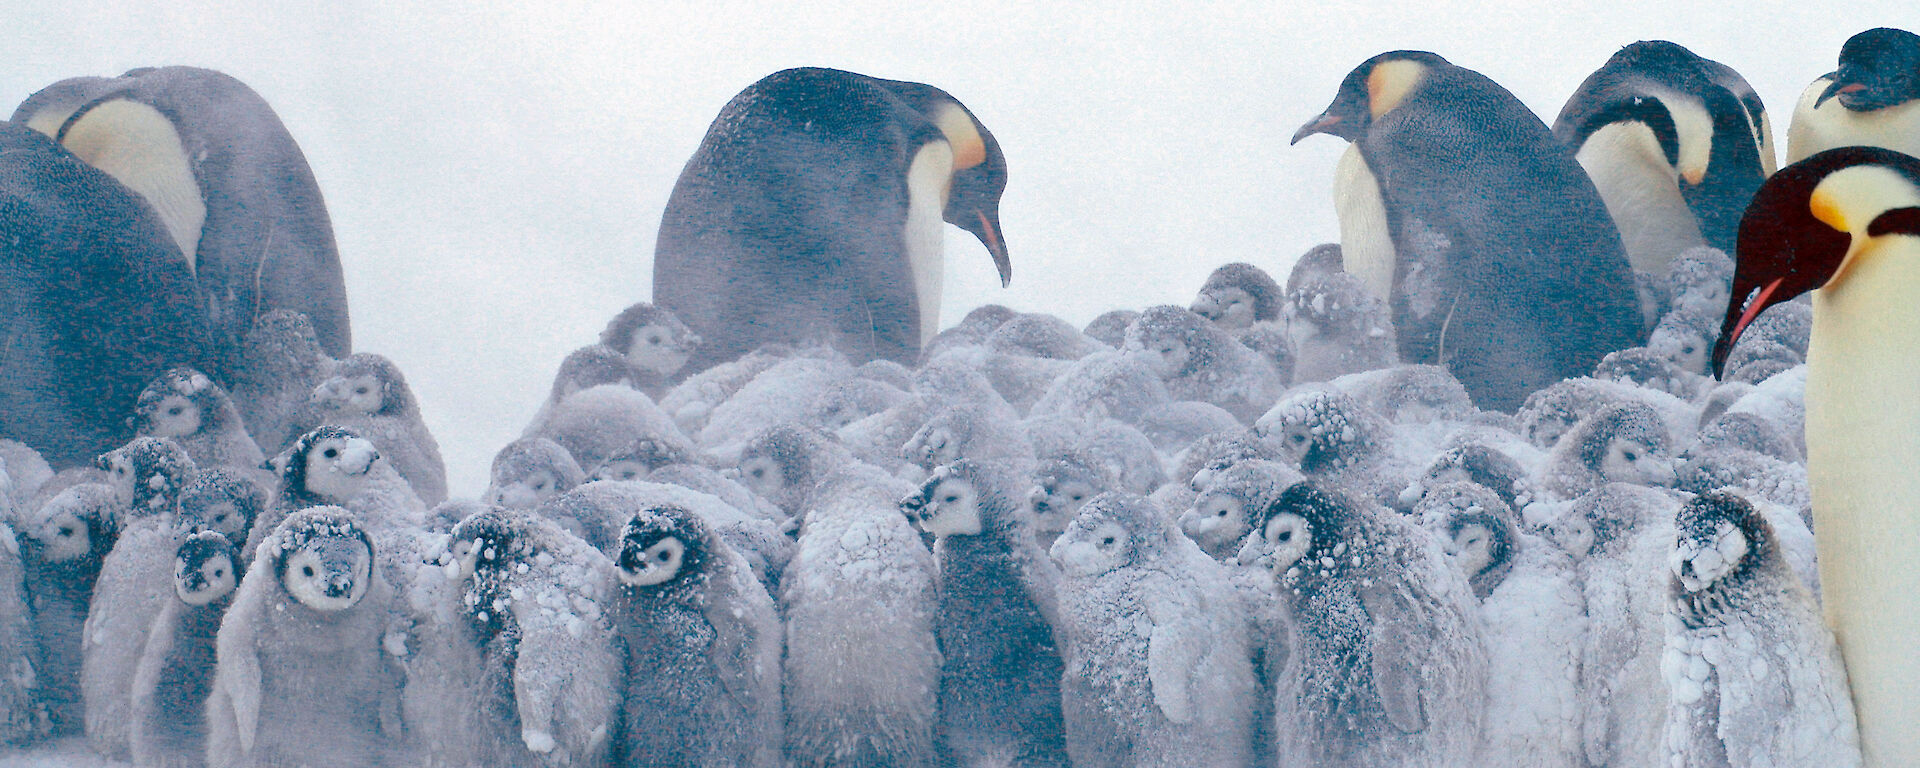 A huddle of emperor penguin chicks in a blizzard.